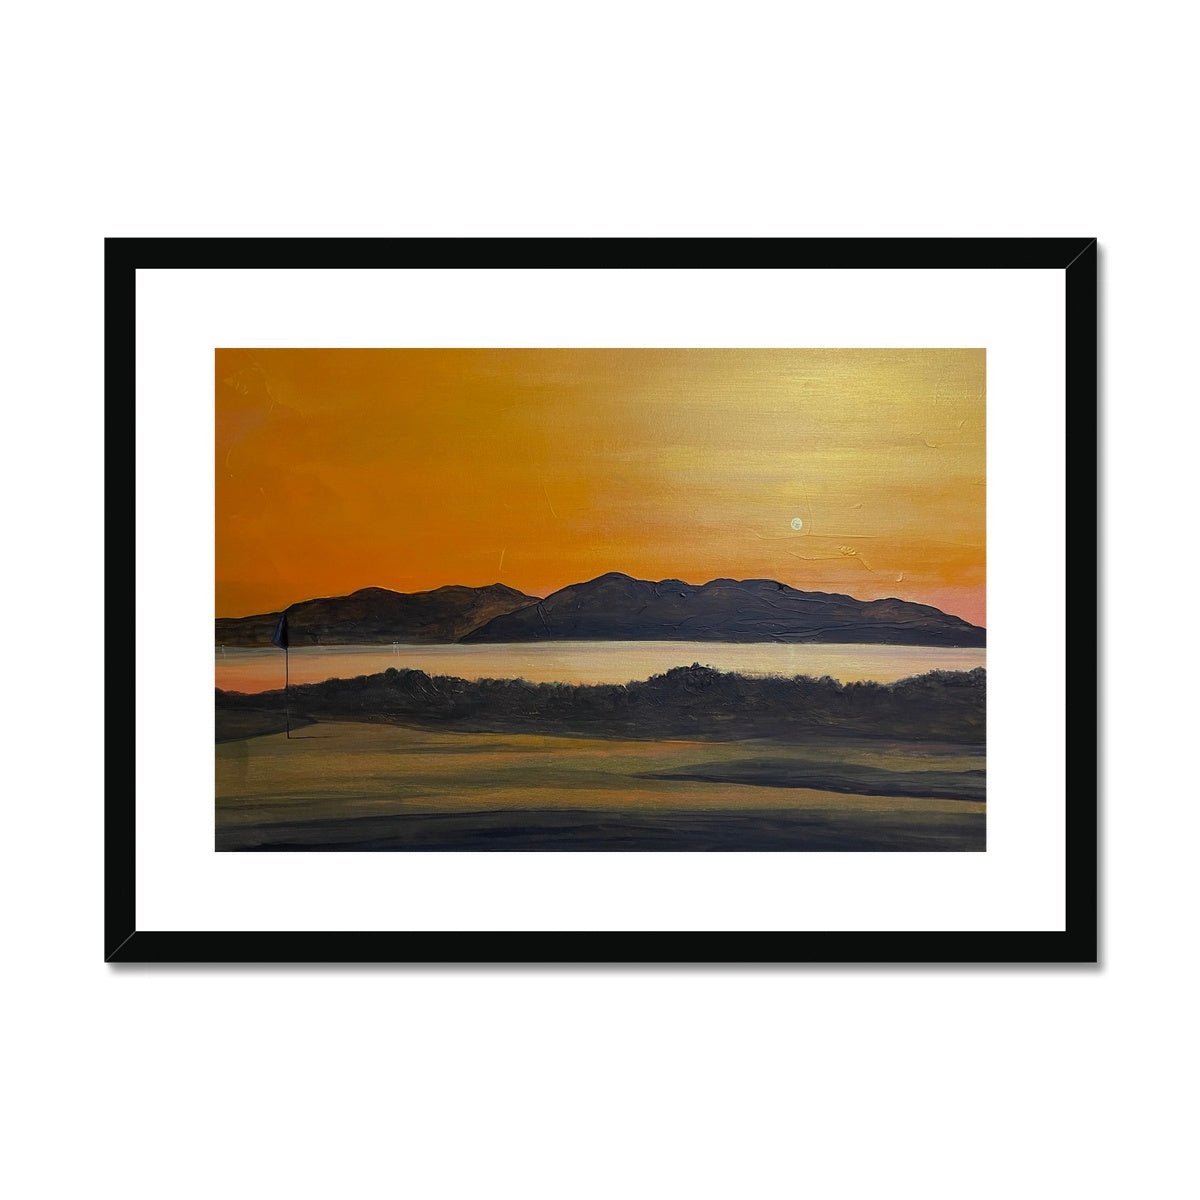 Arran & The 5th Green Royal Troon Golf Course Painting | Framed & Mounted Prints From Scotland-Framed & Mounted Prints-Arran Art Gallery-A2 Landscape-Black Frame-Paintings, Prints, Homeware, Art Gifts From Scotland By Scottish Artist Kevin Hunter